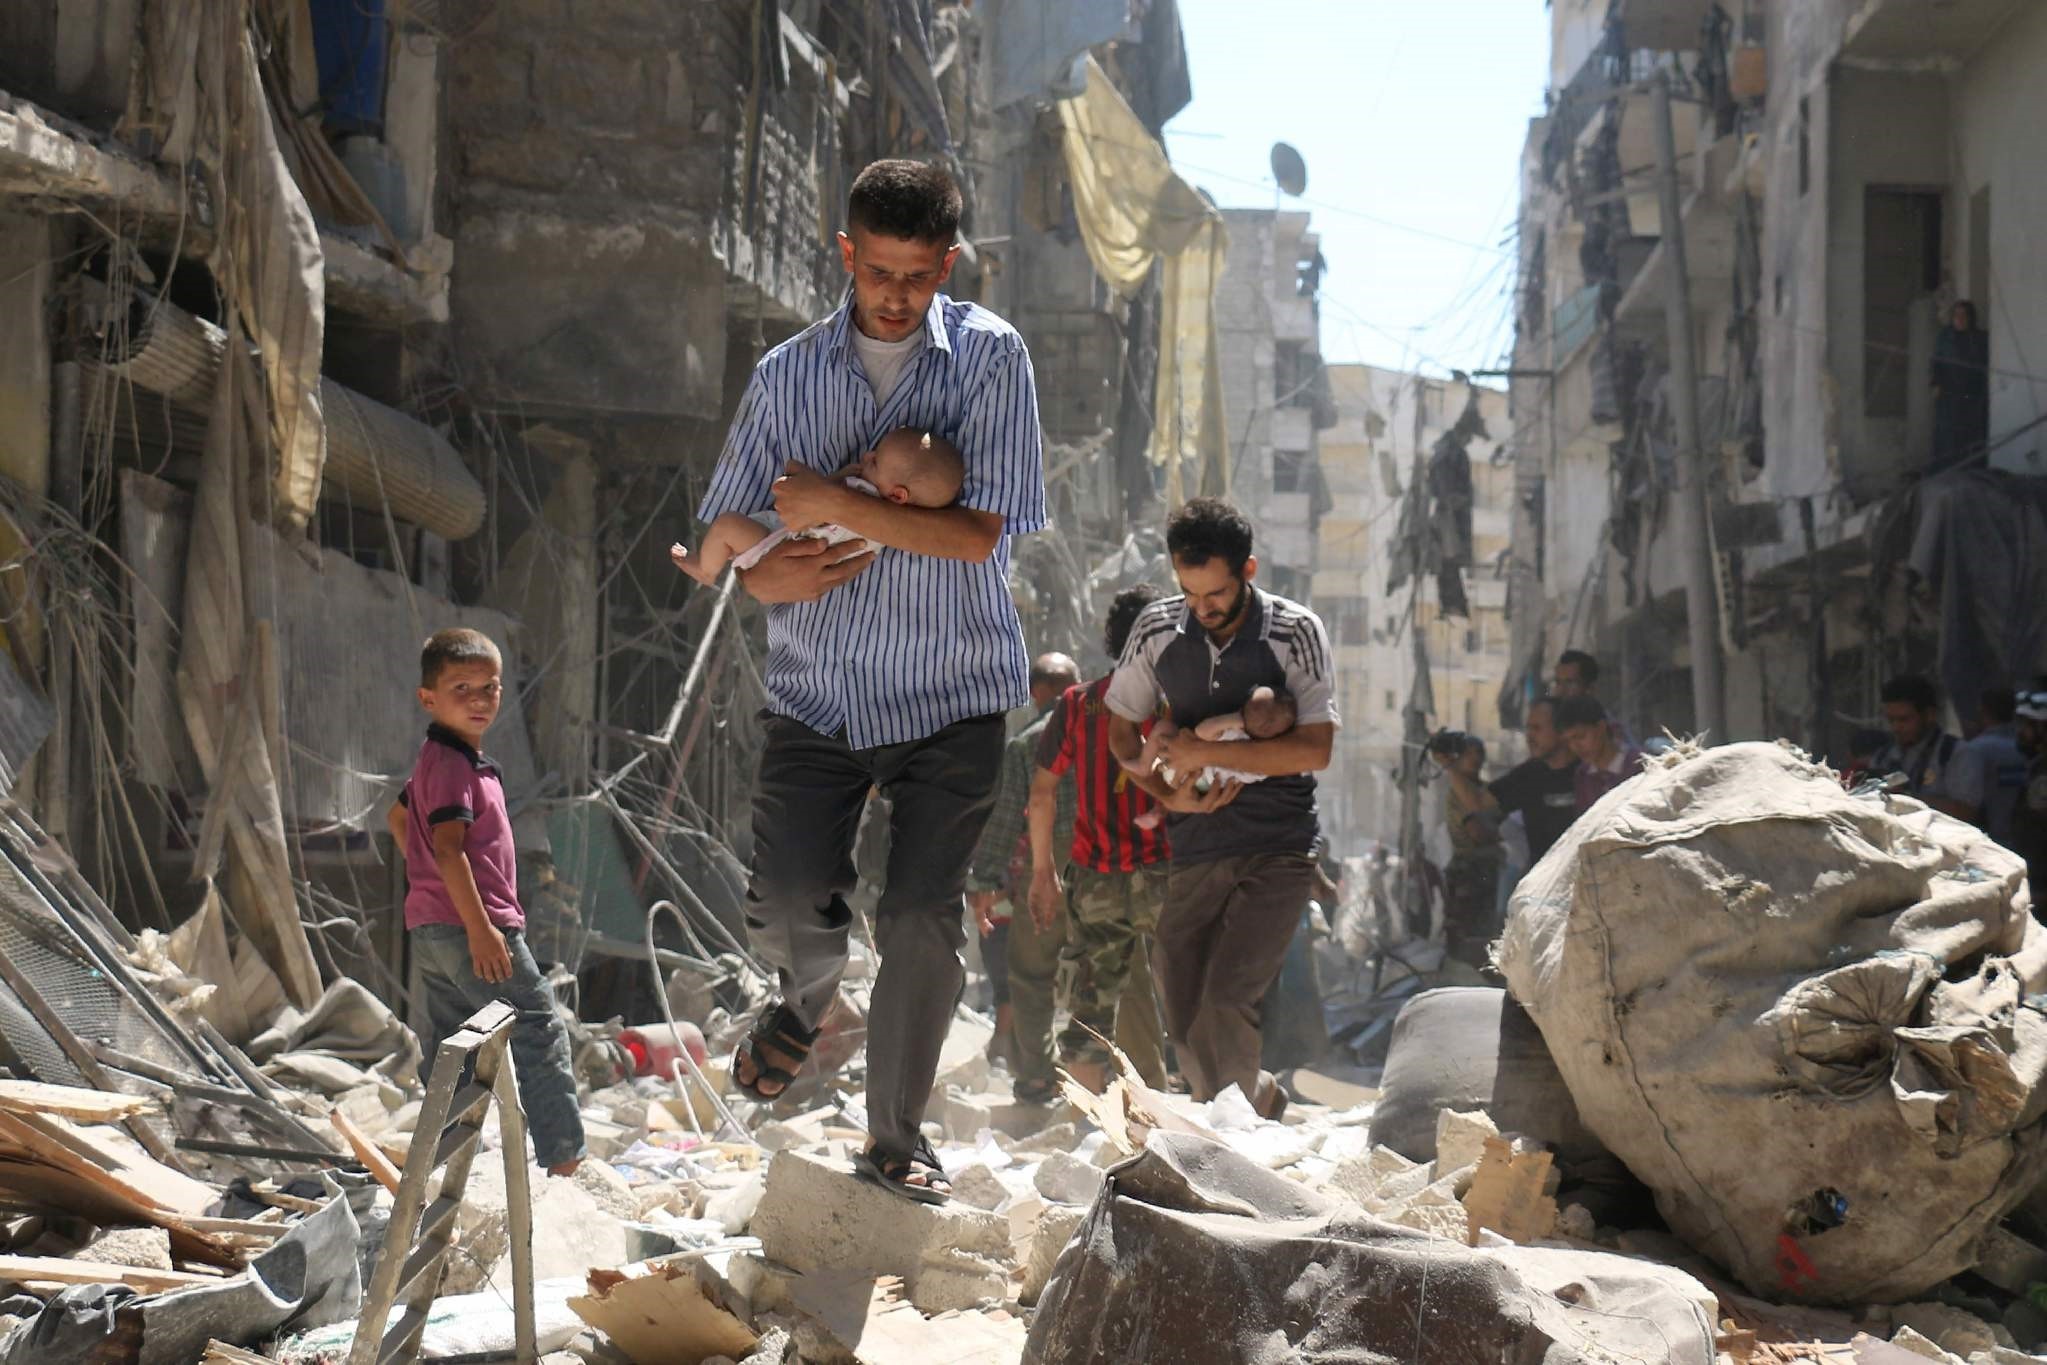 Syrian men carrying babies make their way through the rubble of destroyed buildings following a reported air strike on Aleppo. (AFP Photo)